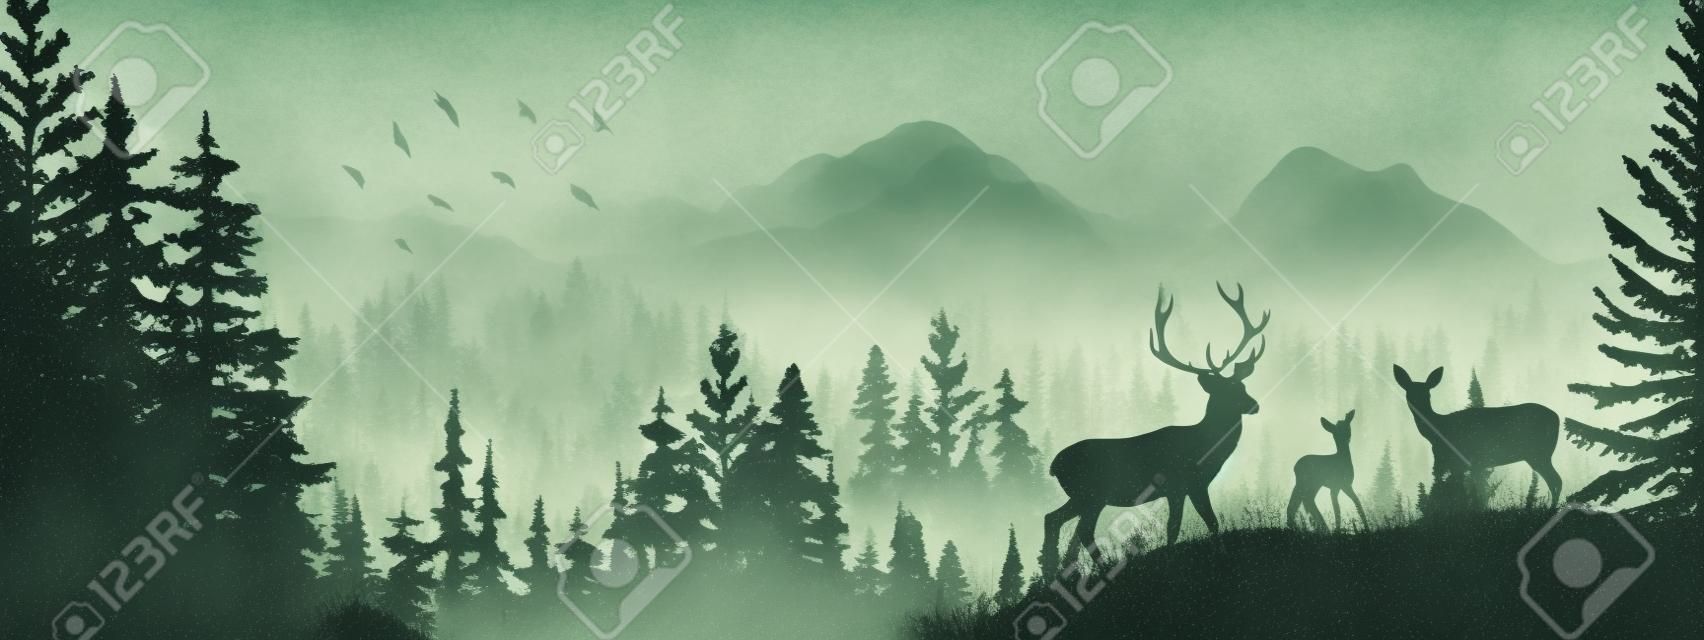 Horizontal banner. Silhouette of deer, doe, fawn standing on meadow in forrest. Silhouette of animal, trees, grass. Magical misty landscape, fog, mountains. Gray illustration. Bookmark.